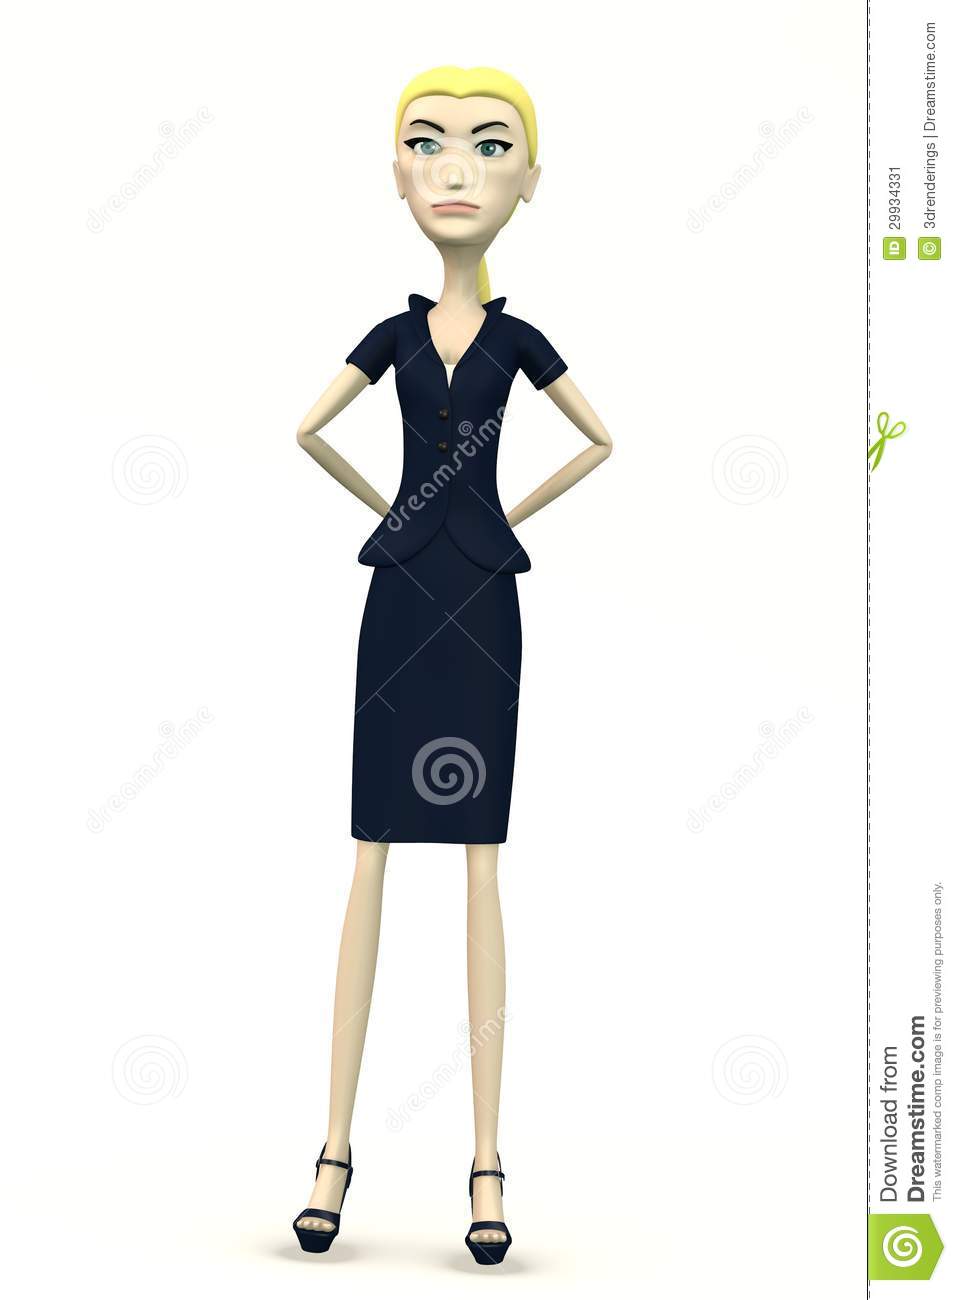 Angry Cartoon Woman In Suit Stock Image   Image  29934331